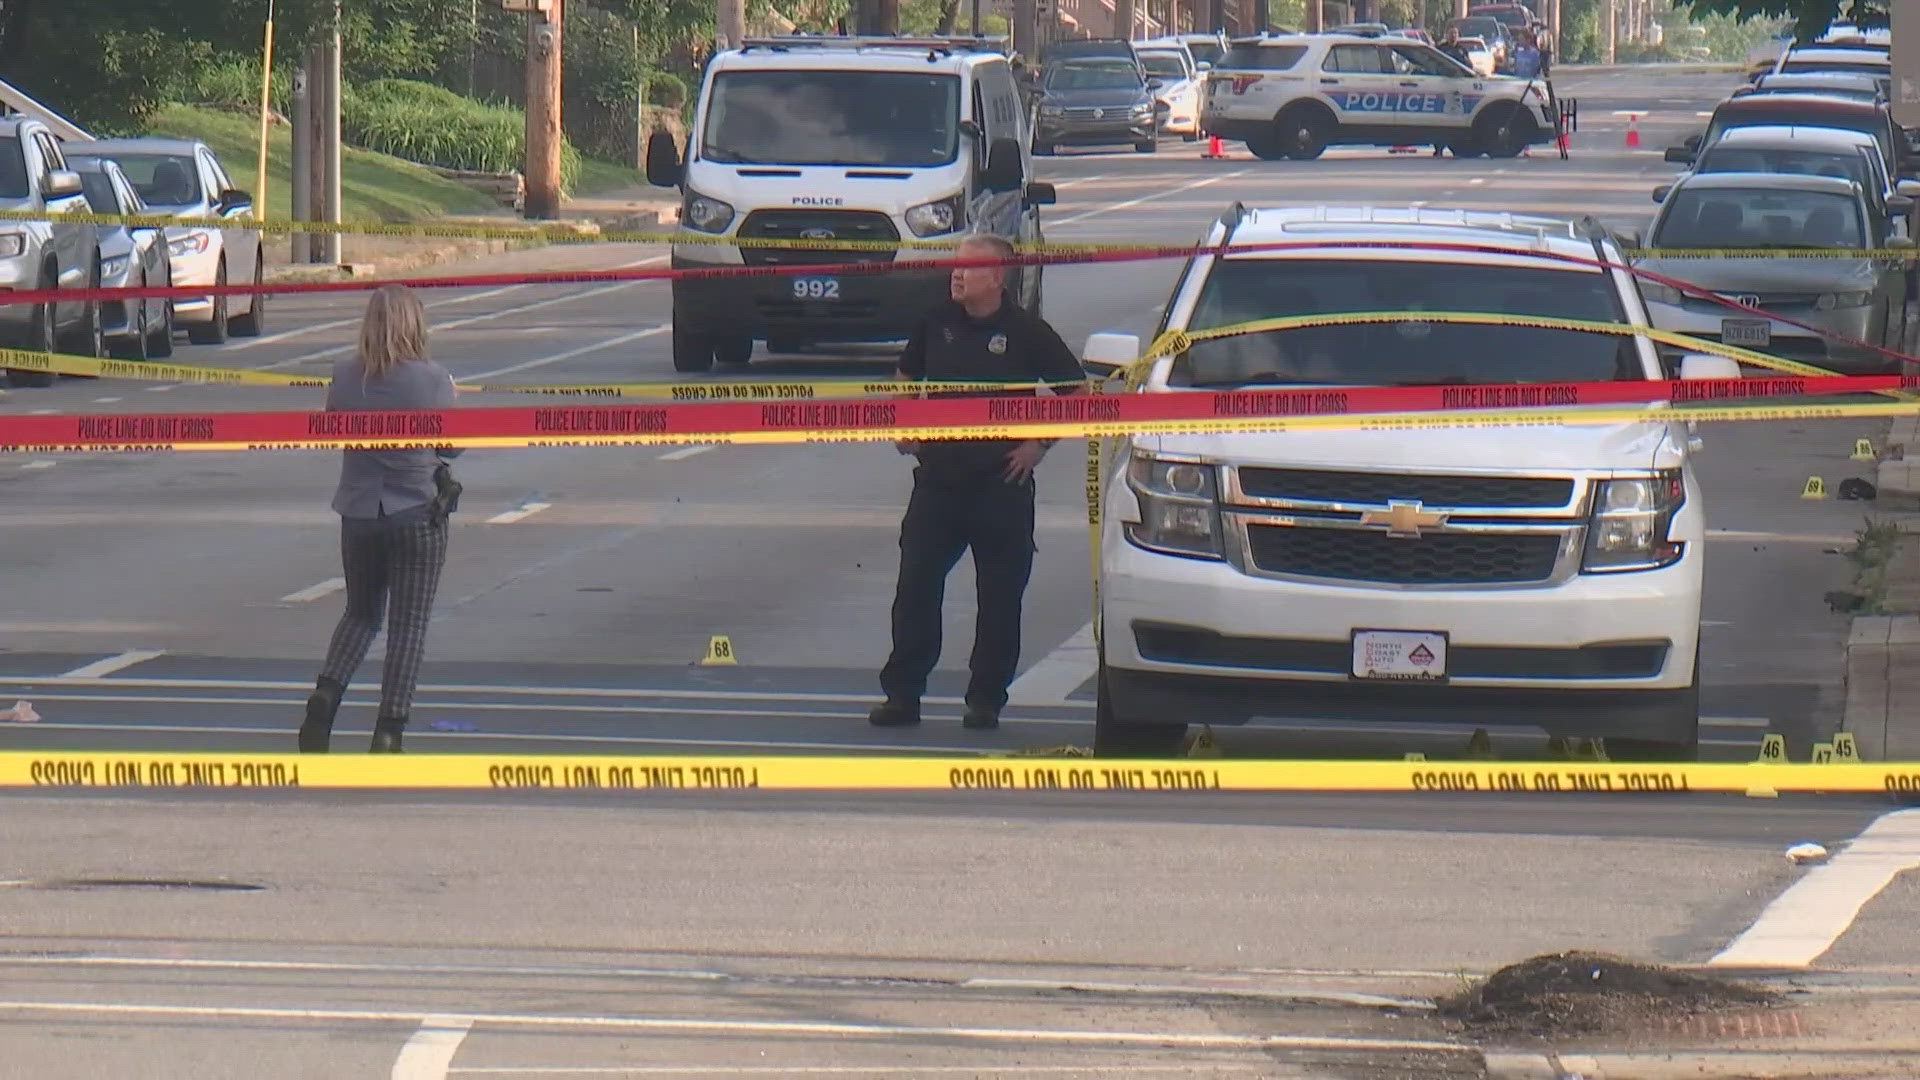 Five people were killed and several others injured in five separate shootings throughout the city of Columbus on Saturday and Sunday.